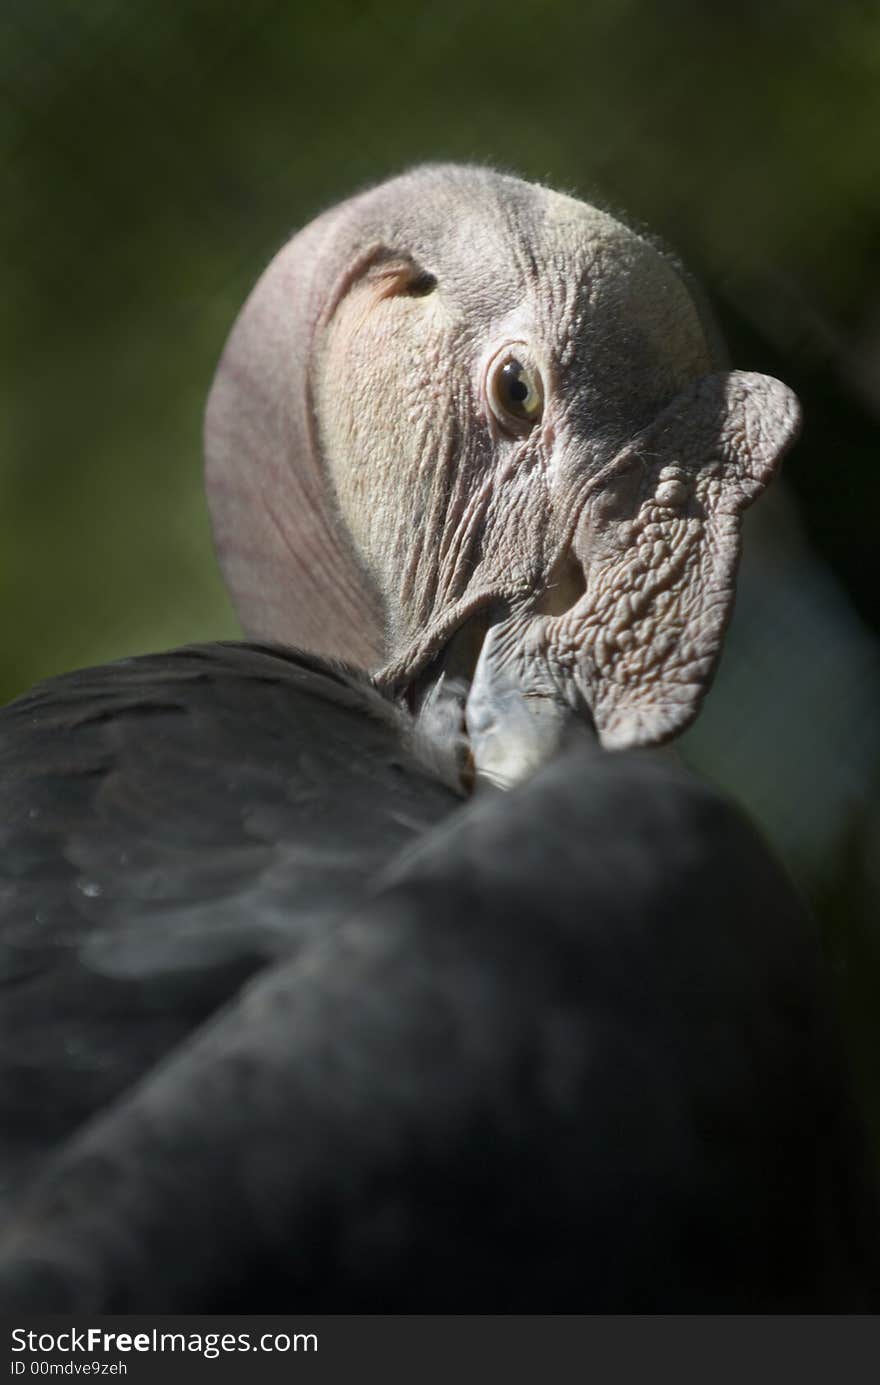 He Andean condor is a large vulture with a wingspan than can exceed 10 feet.